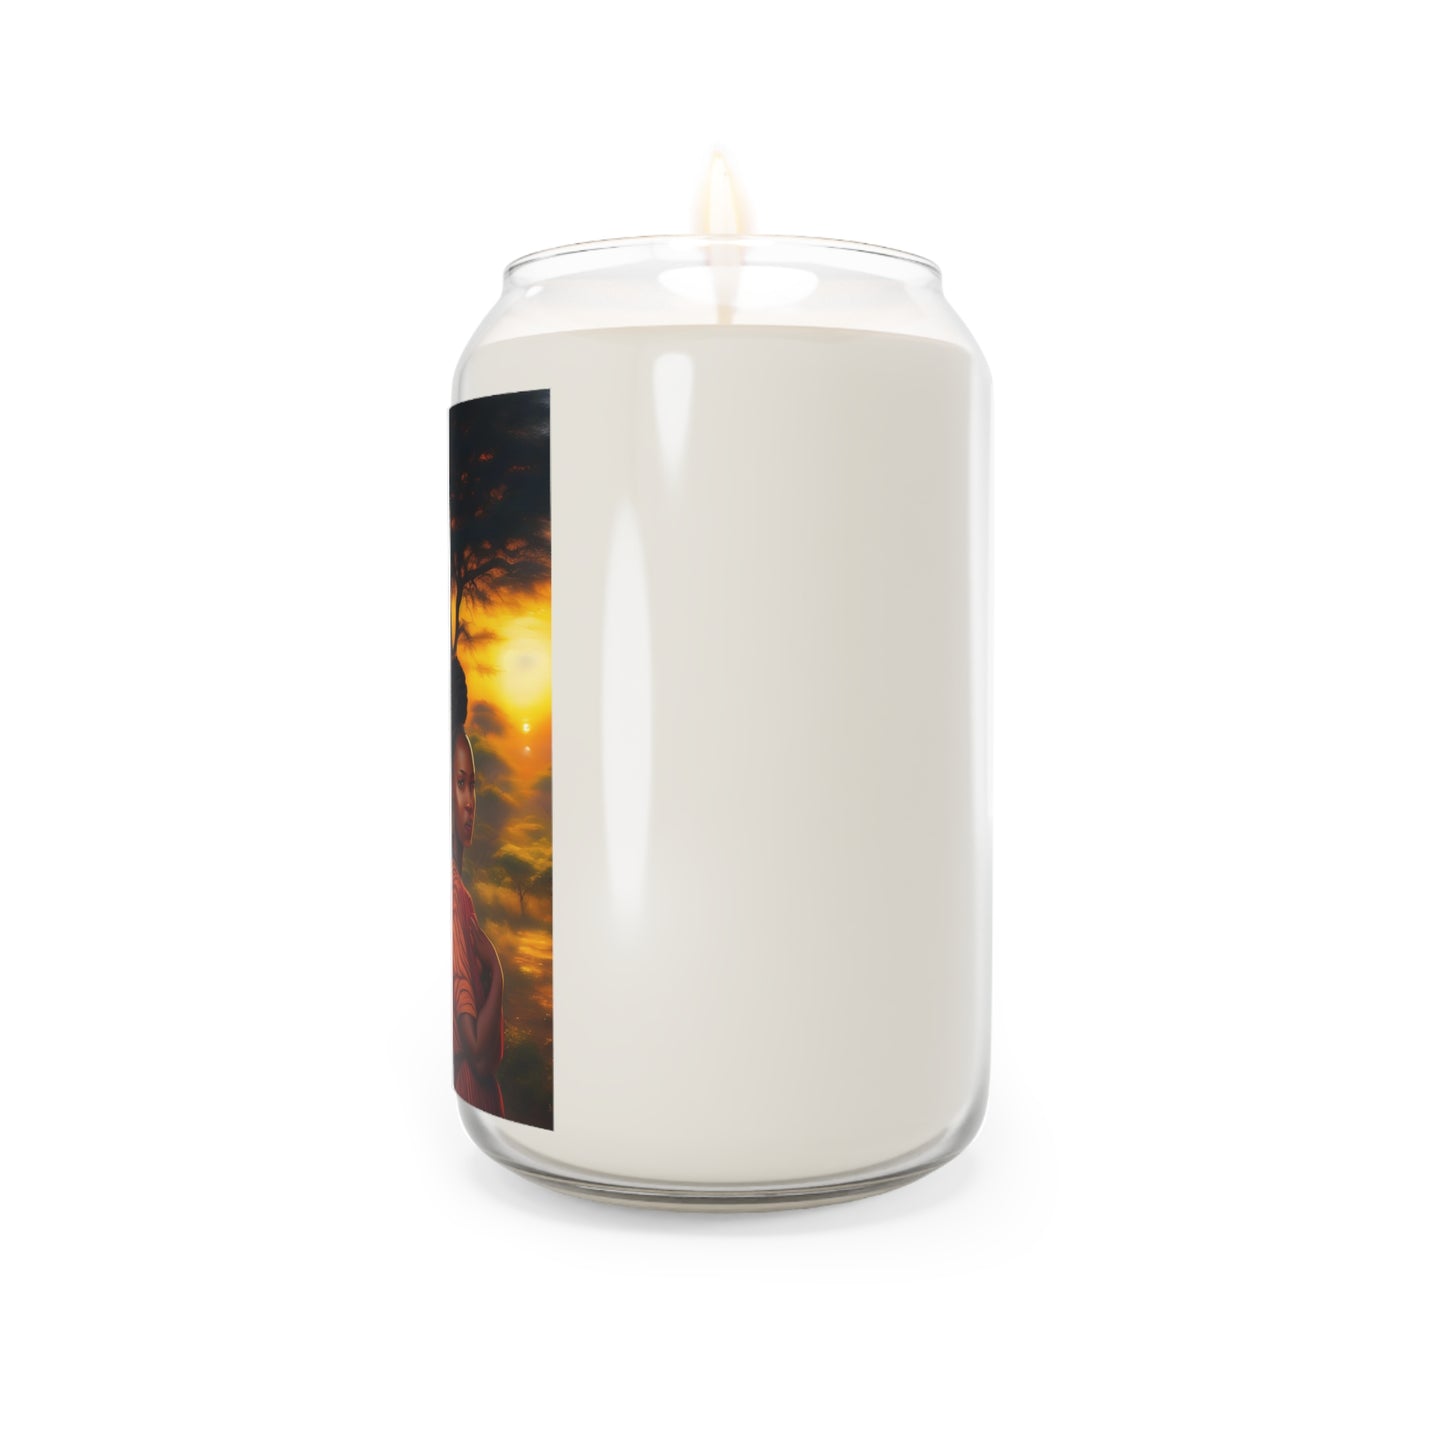 Experience Africa Scented Candle, 13.75oz